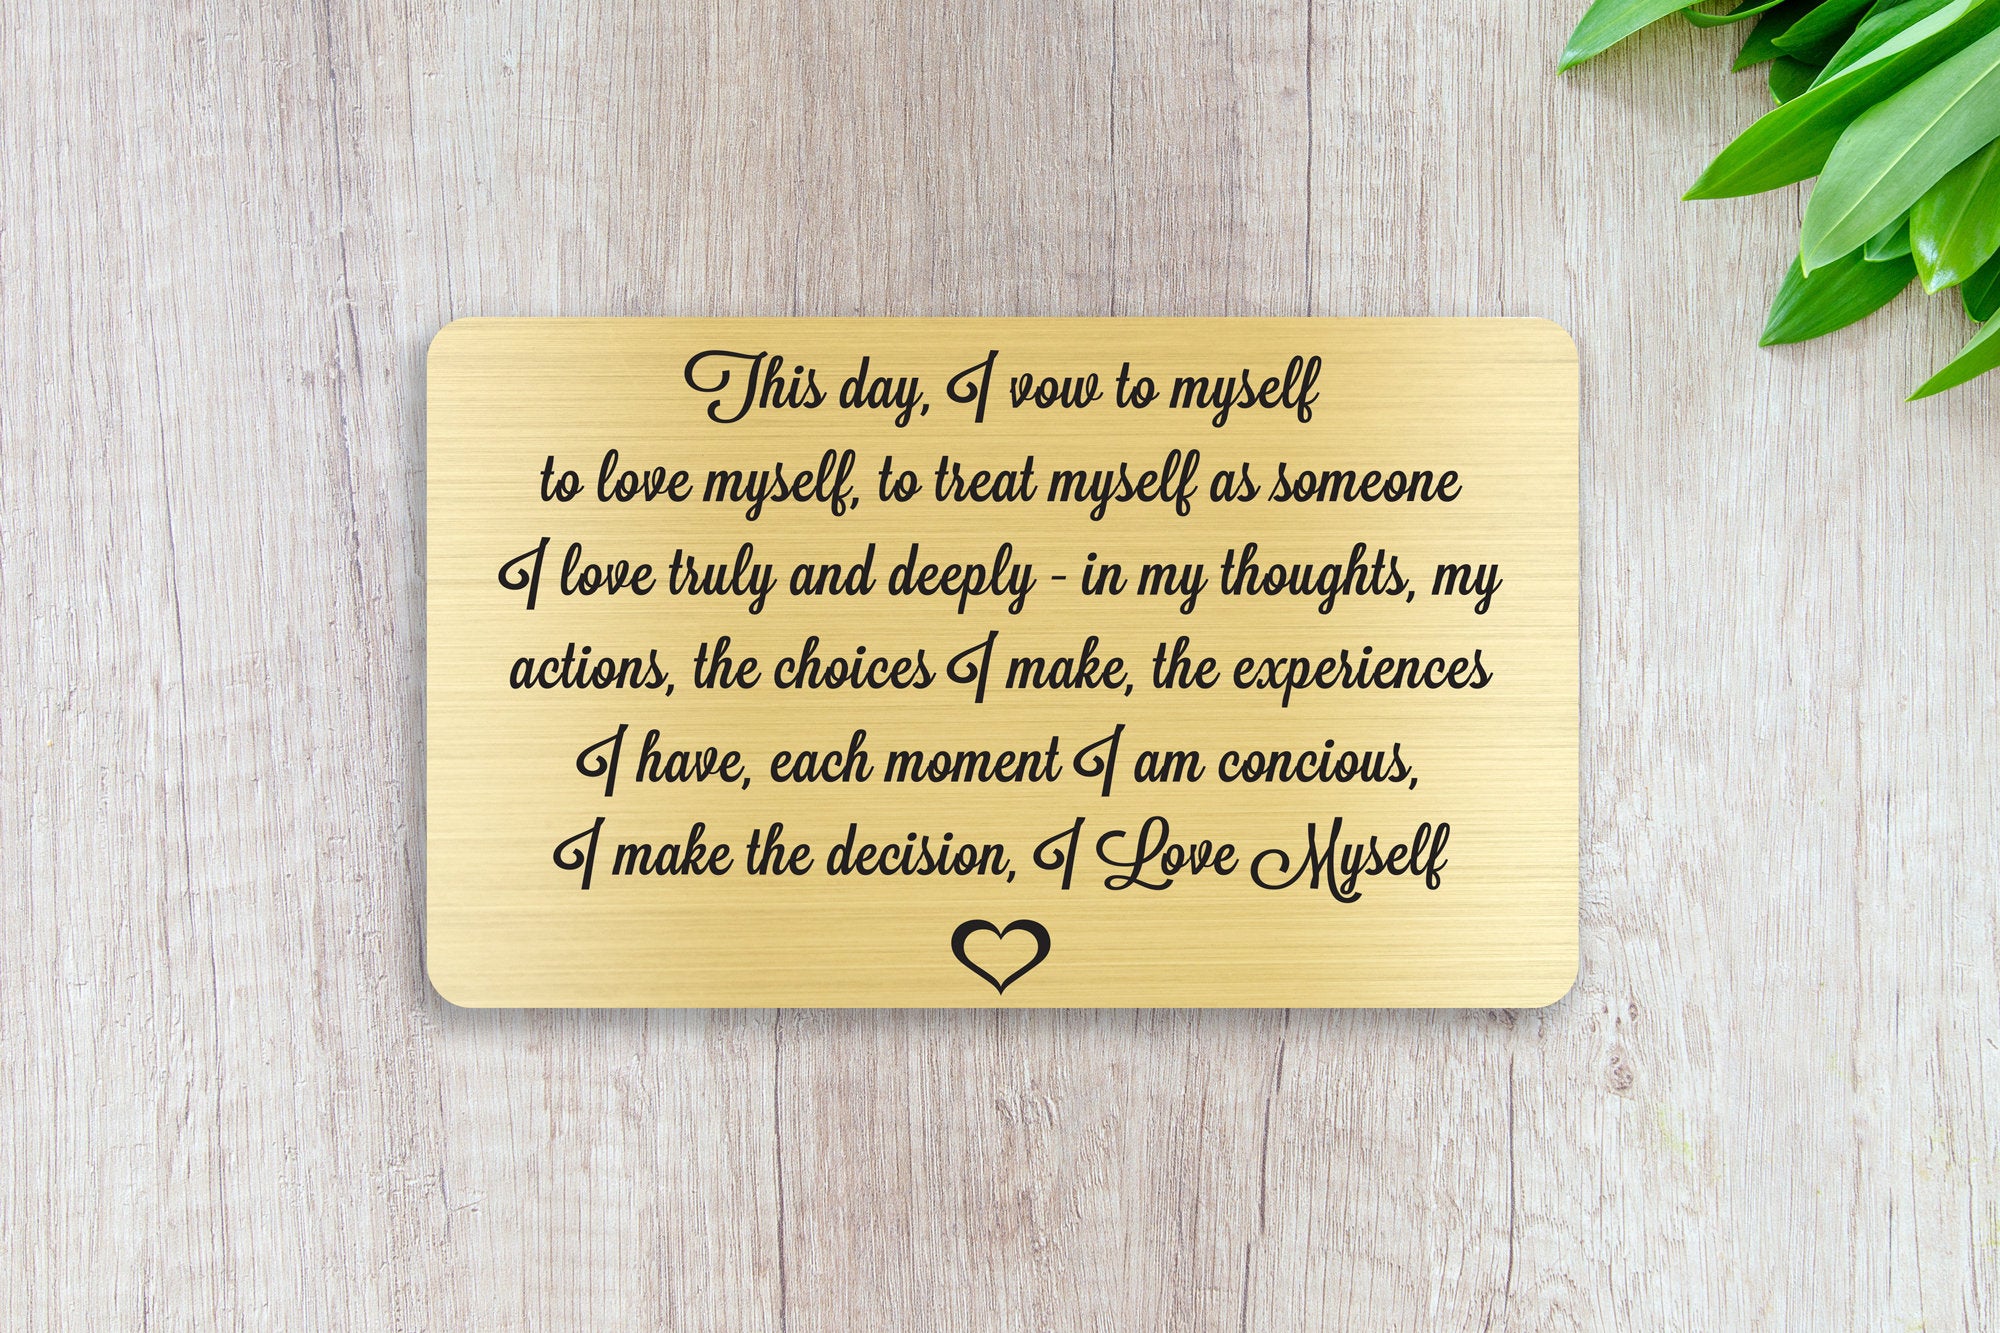 Vows To Myself, Personalized Wallet Card Insert, I Love Myself, Self Love, Self Care, Gold